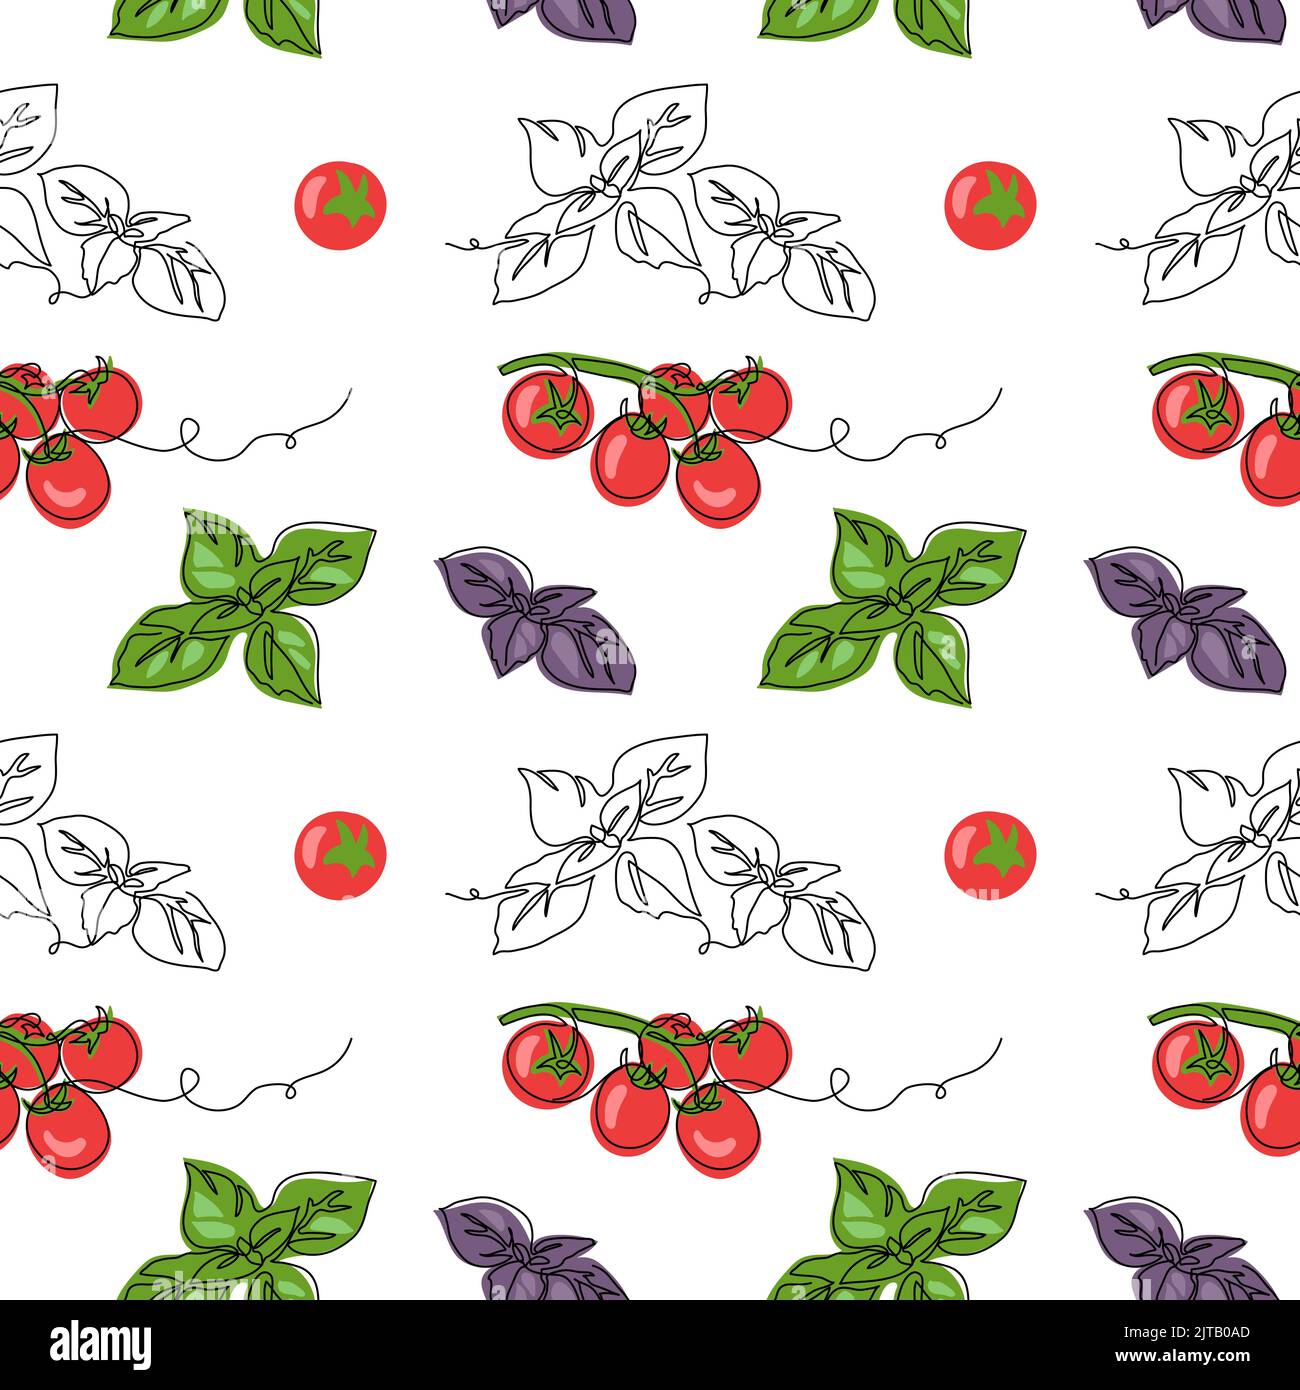 Tomatoes and basil leaves vector pattern. One continuous line art drawing for background,fabric, textile, wallpaper, print, wrapping paper, texture Stock Vector